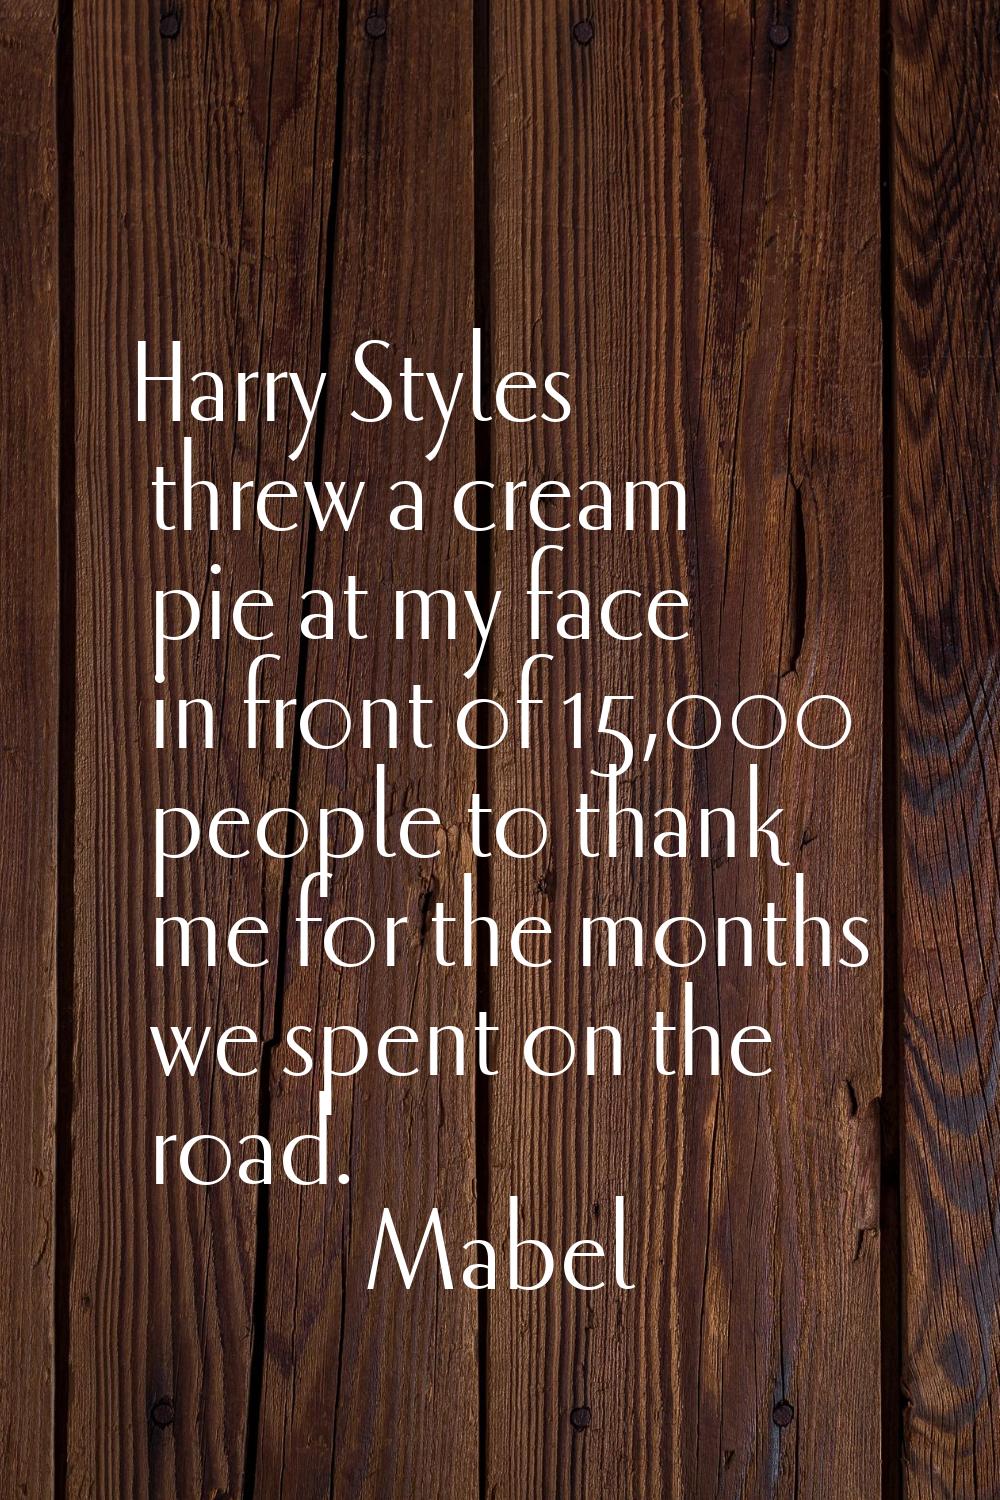 Harry Styles threw a cream pie at my face in front of 15,000 people to thank me for the months we s